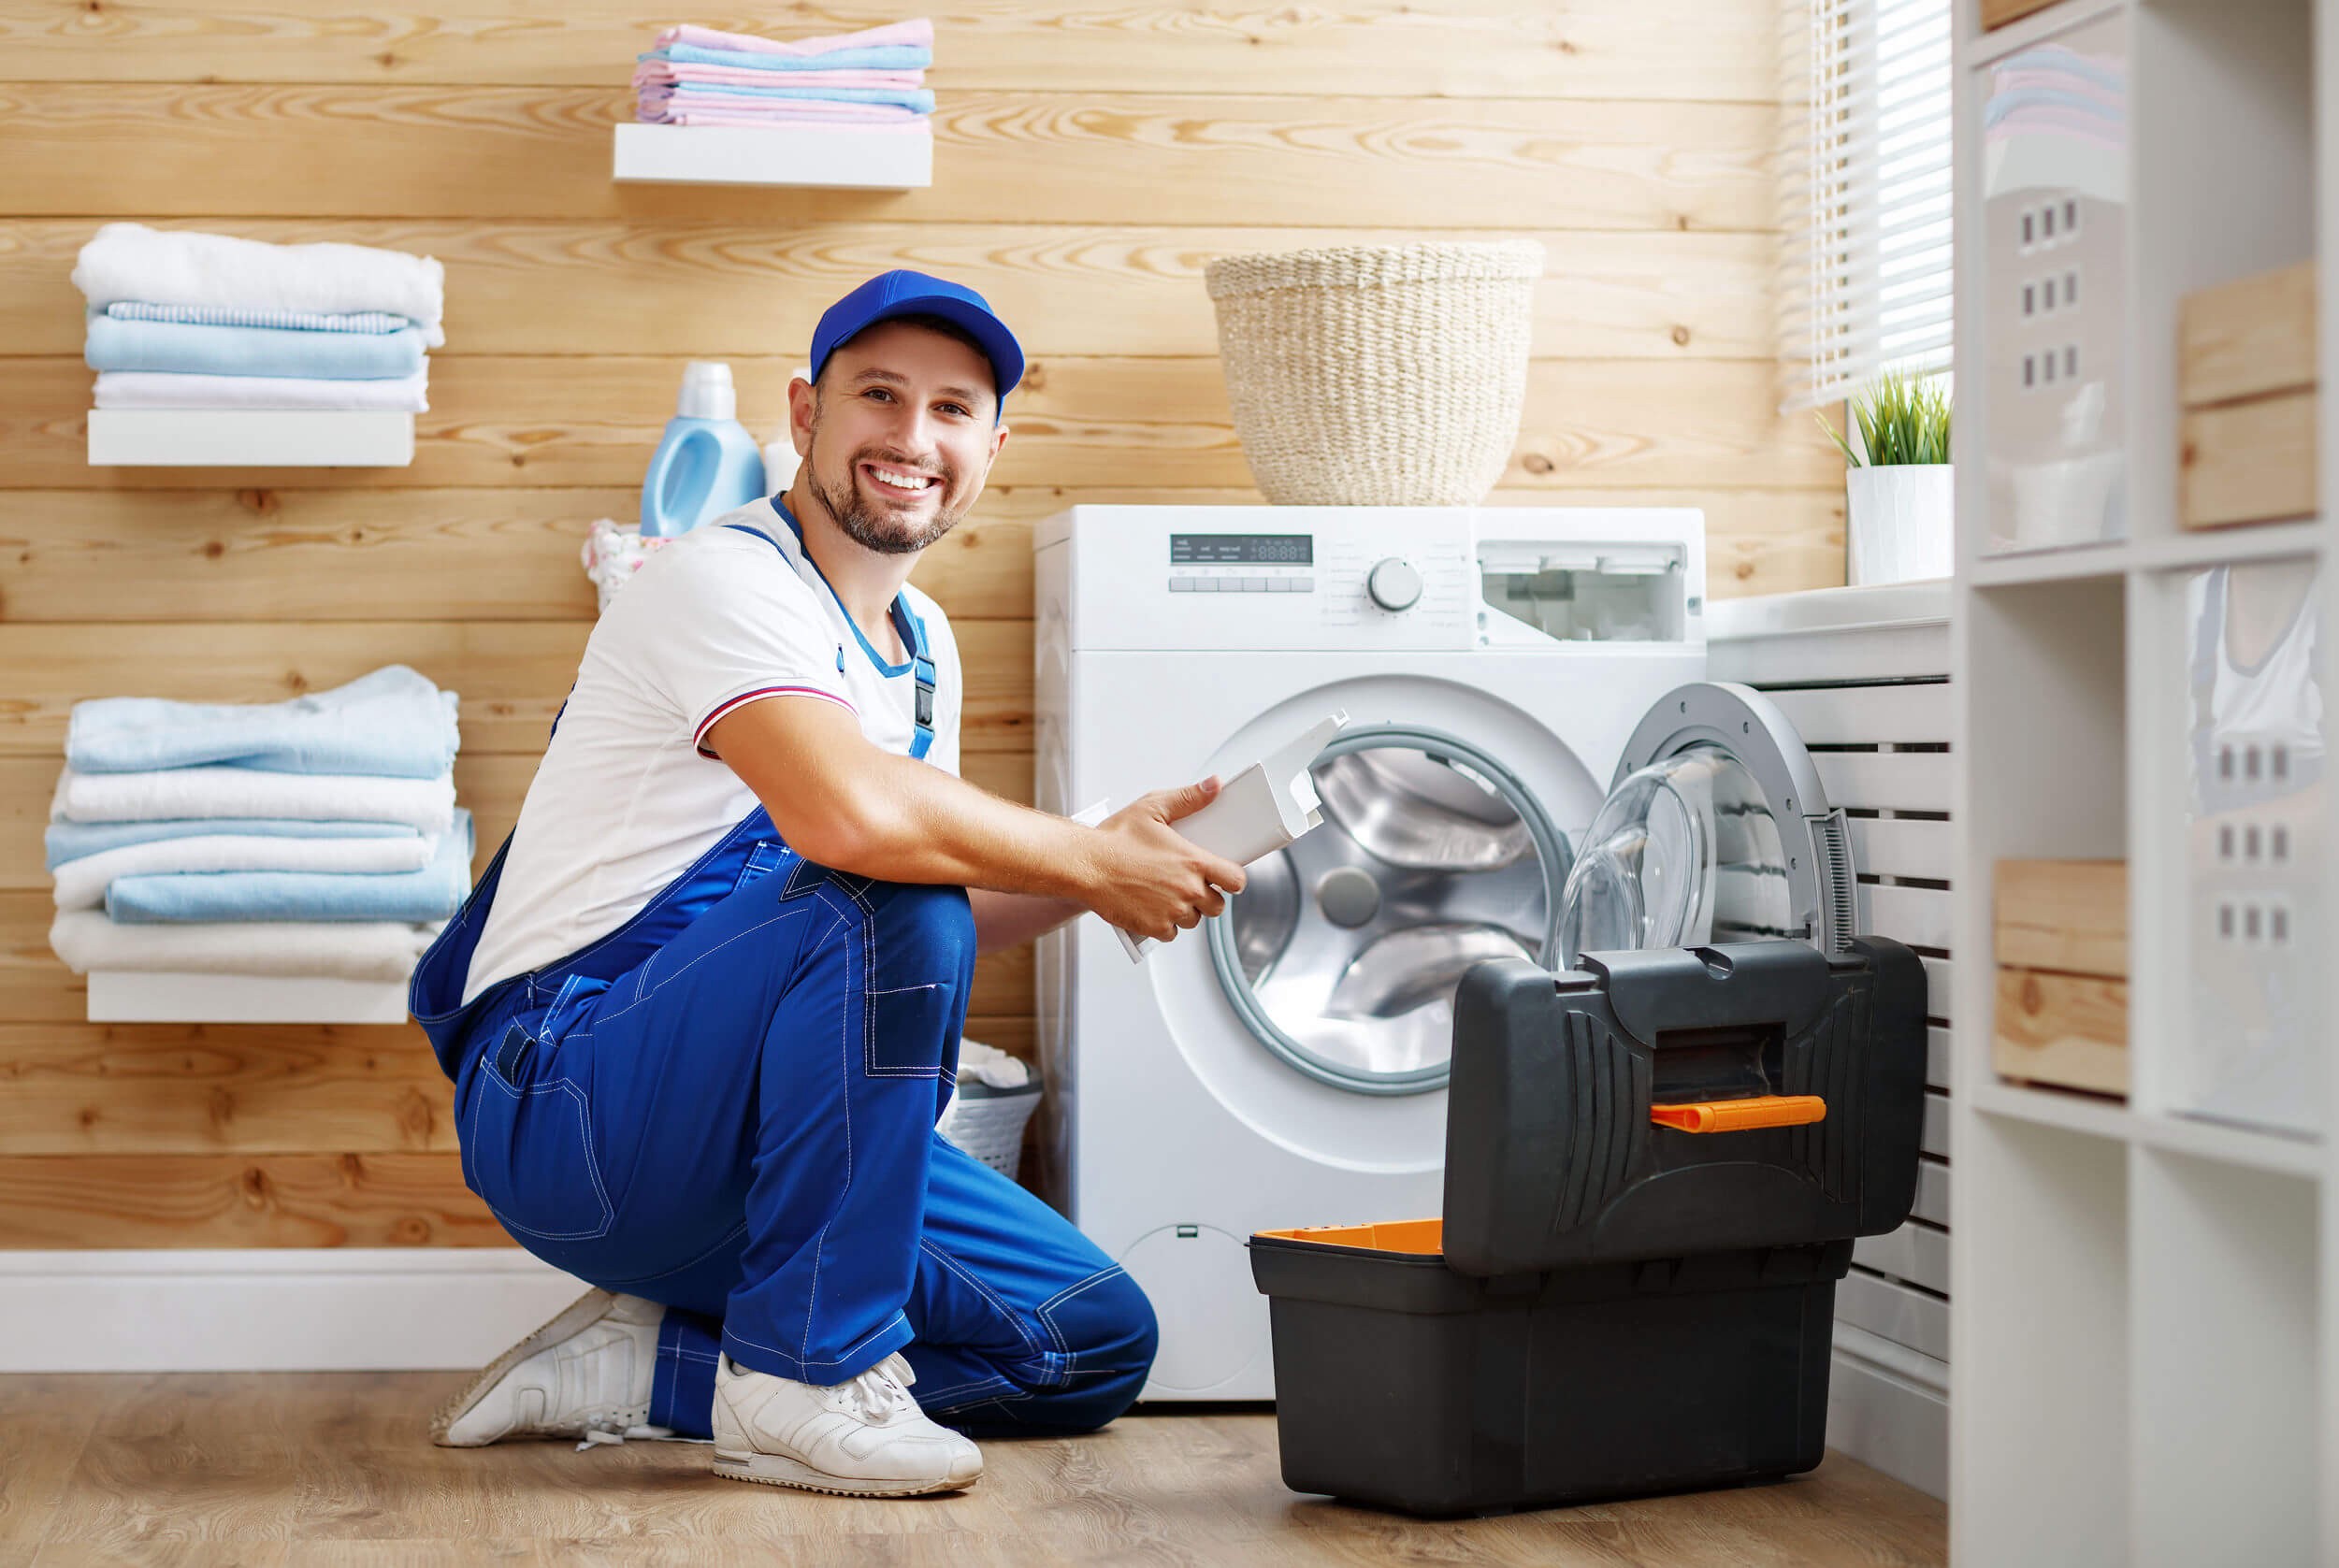 What to Expect From an Appliance Repair Service Provider?